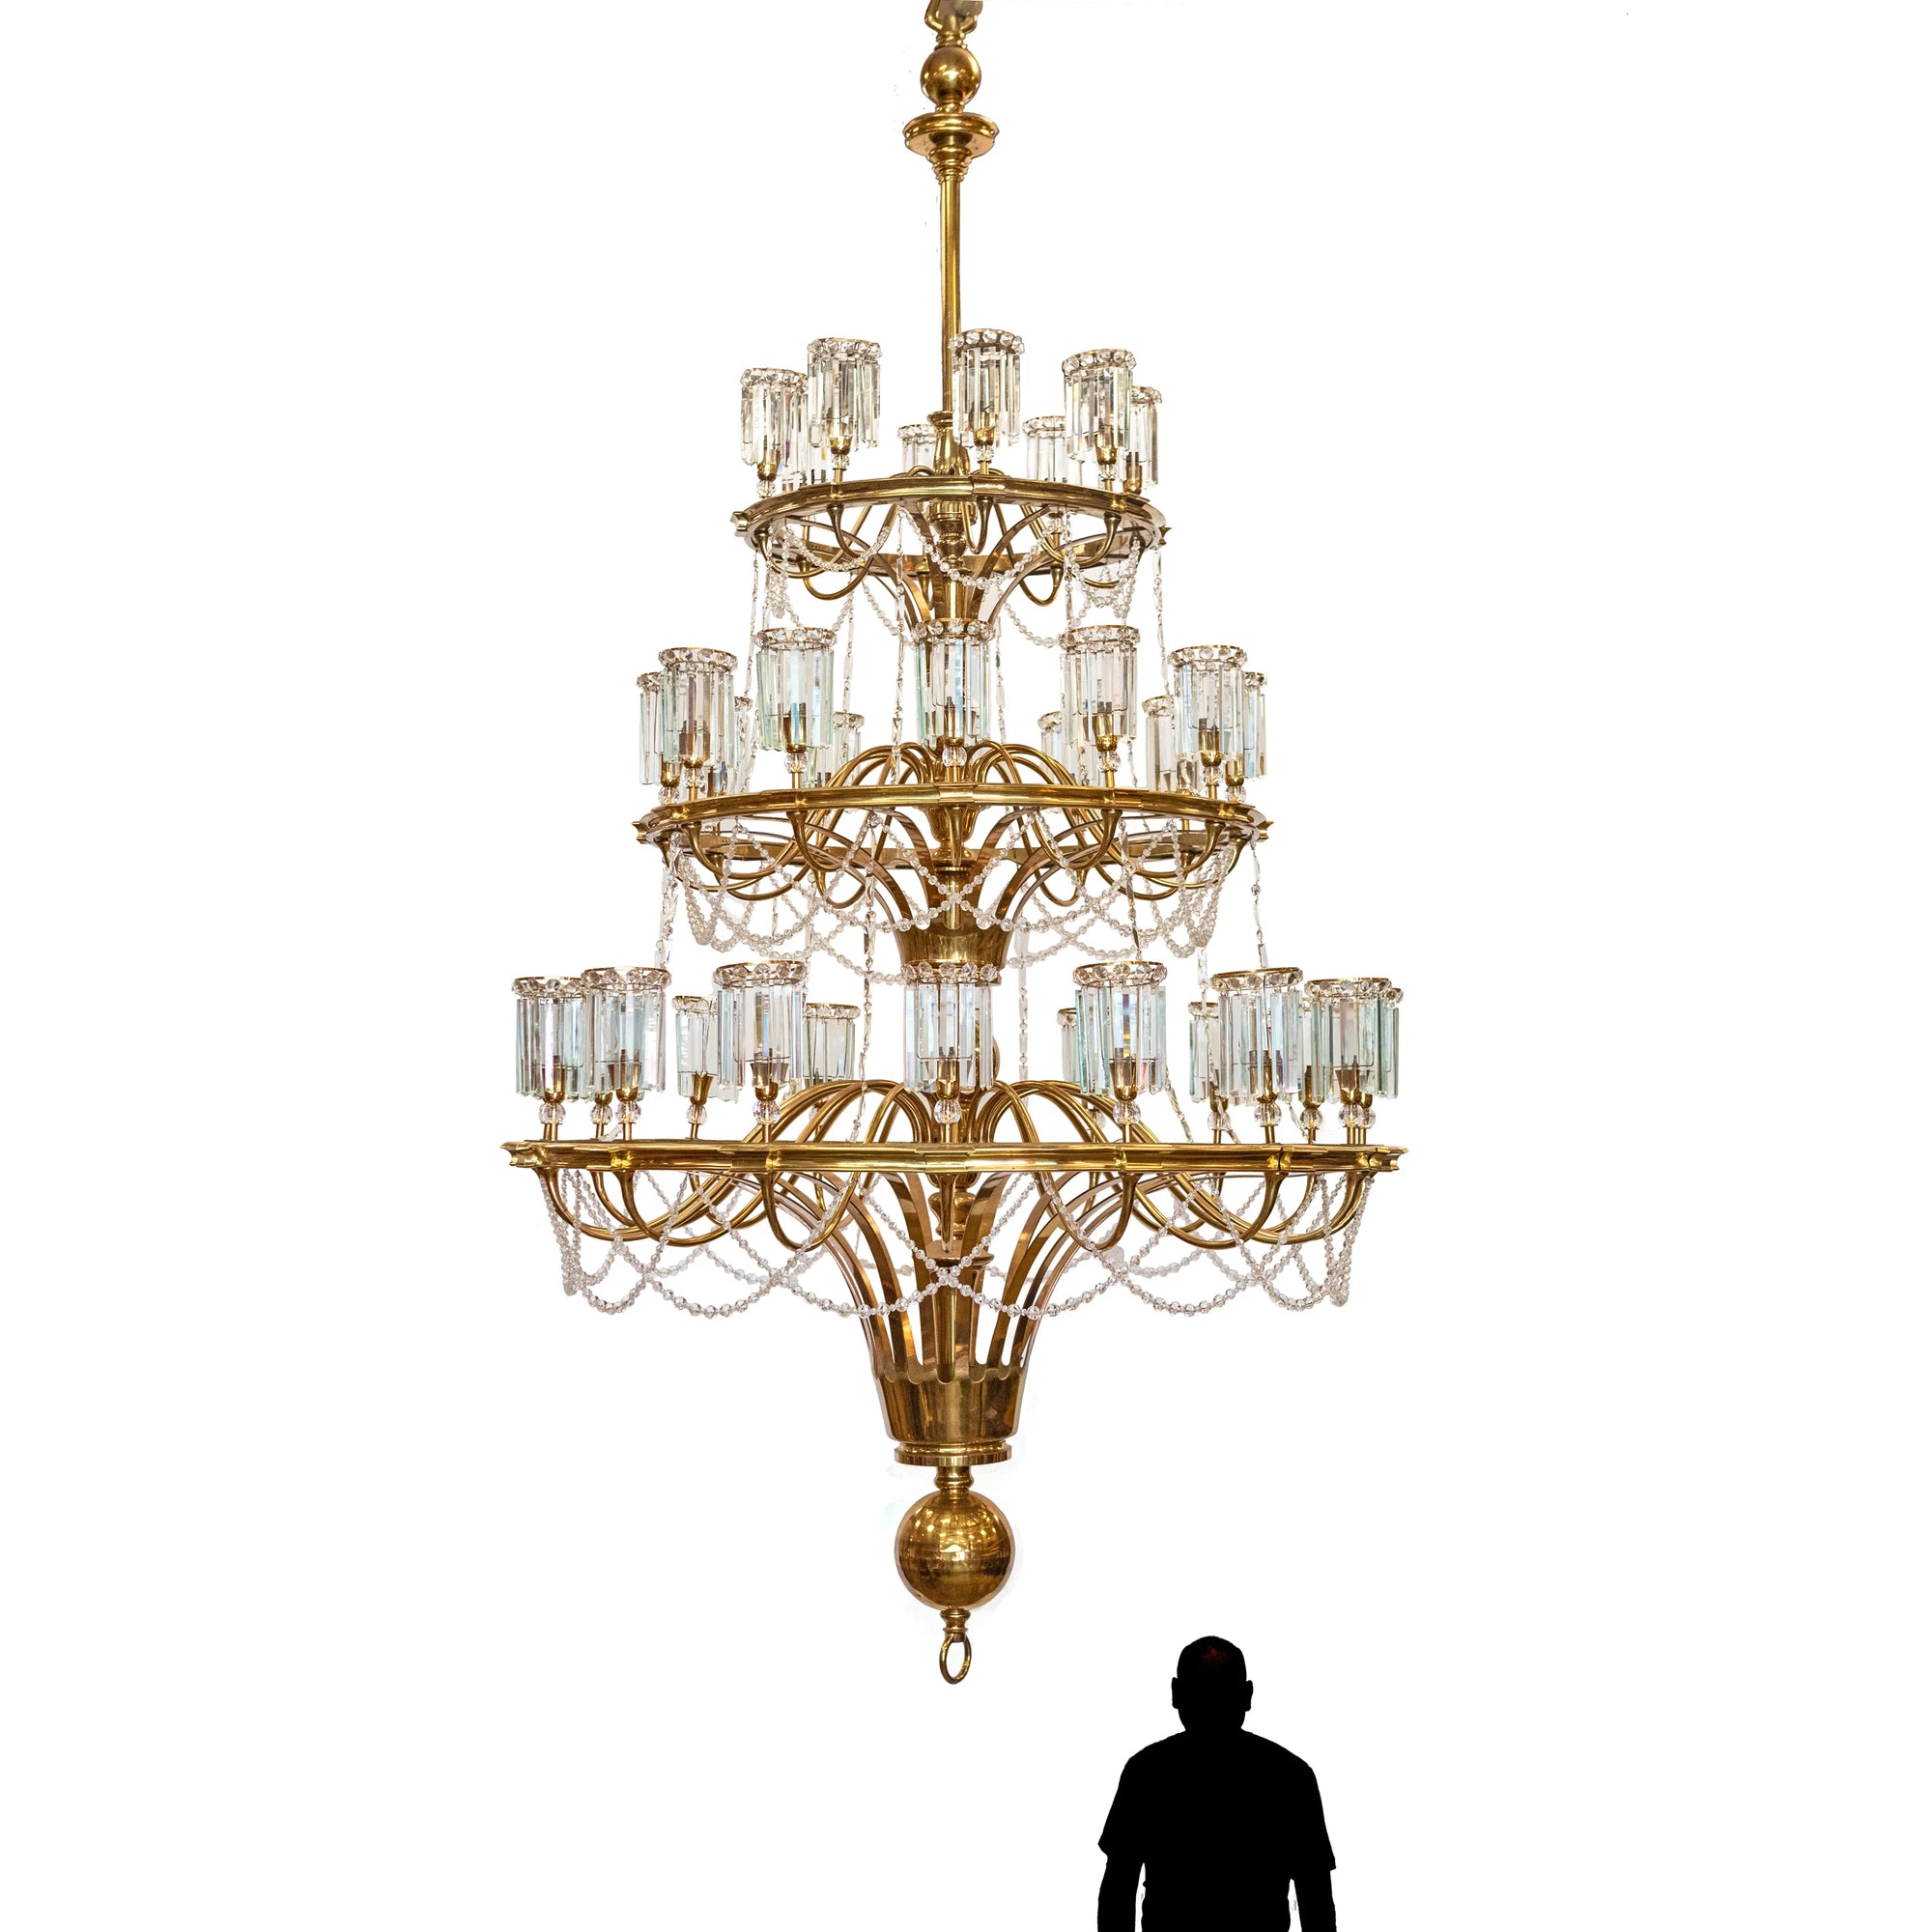 Giant Reclaimed Brass & Crystal Chandelier | >4m Tall | The Architectural Forum